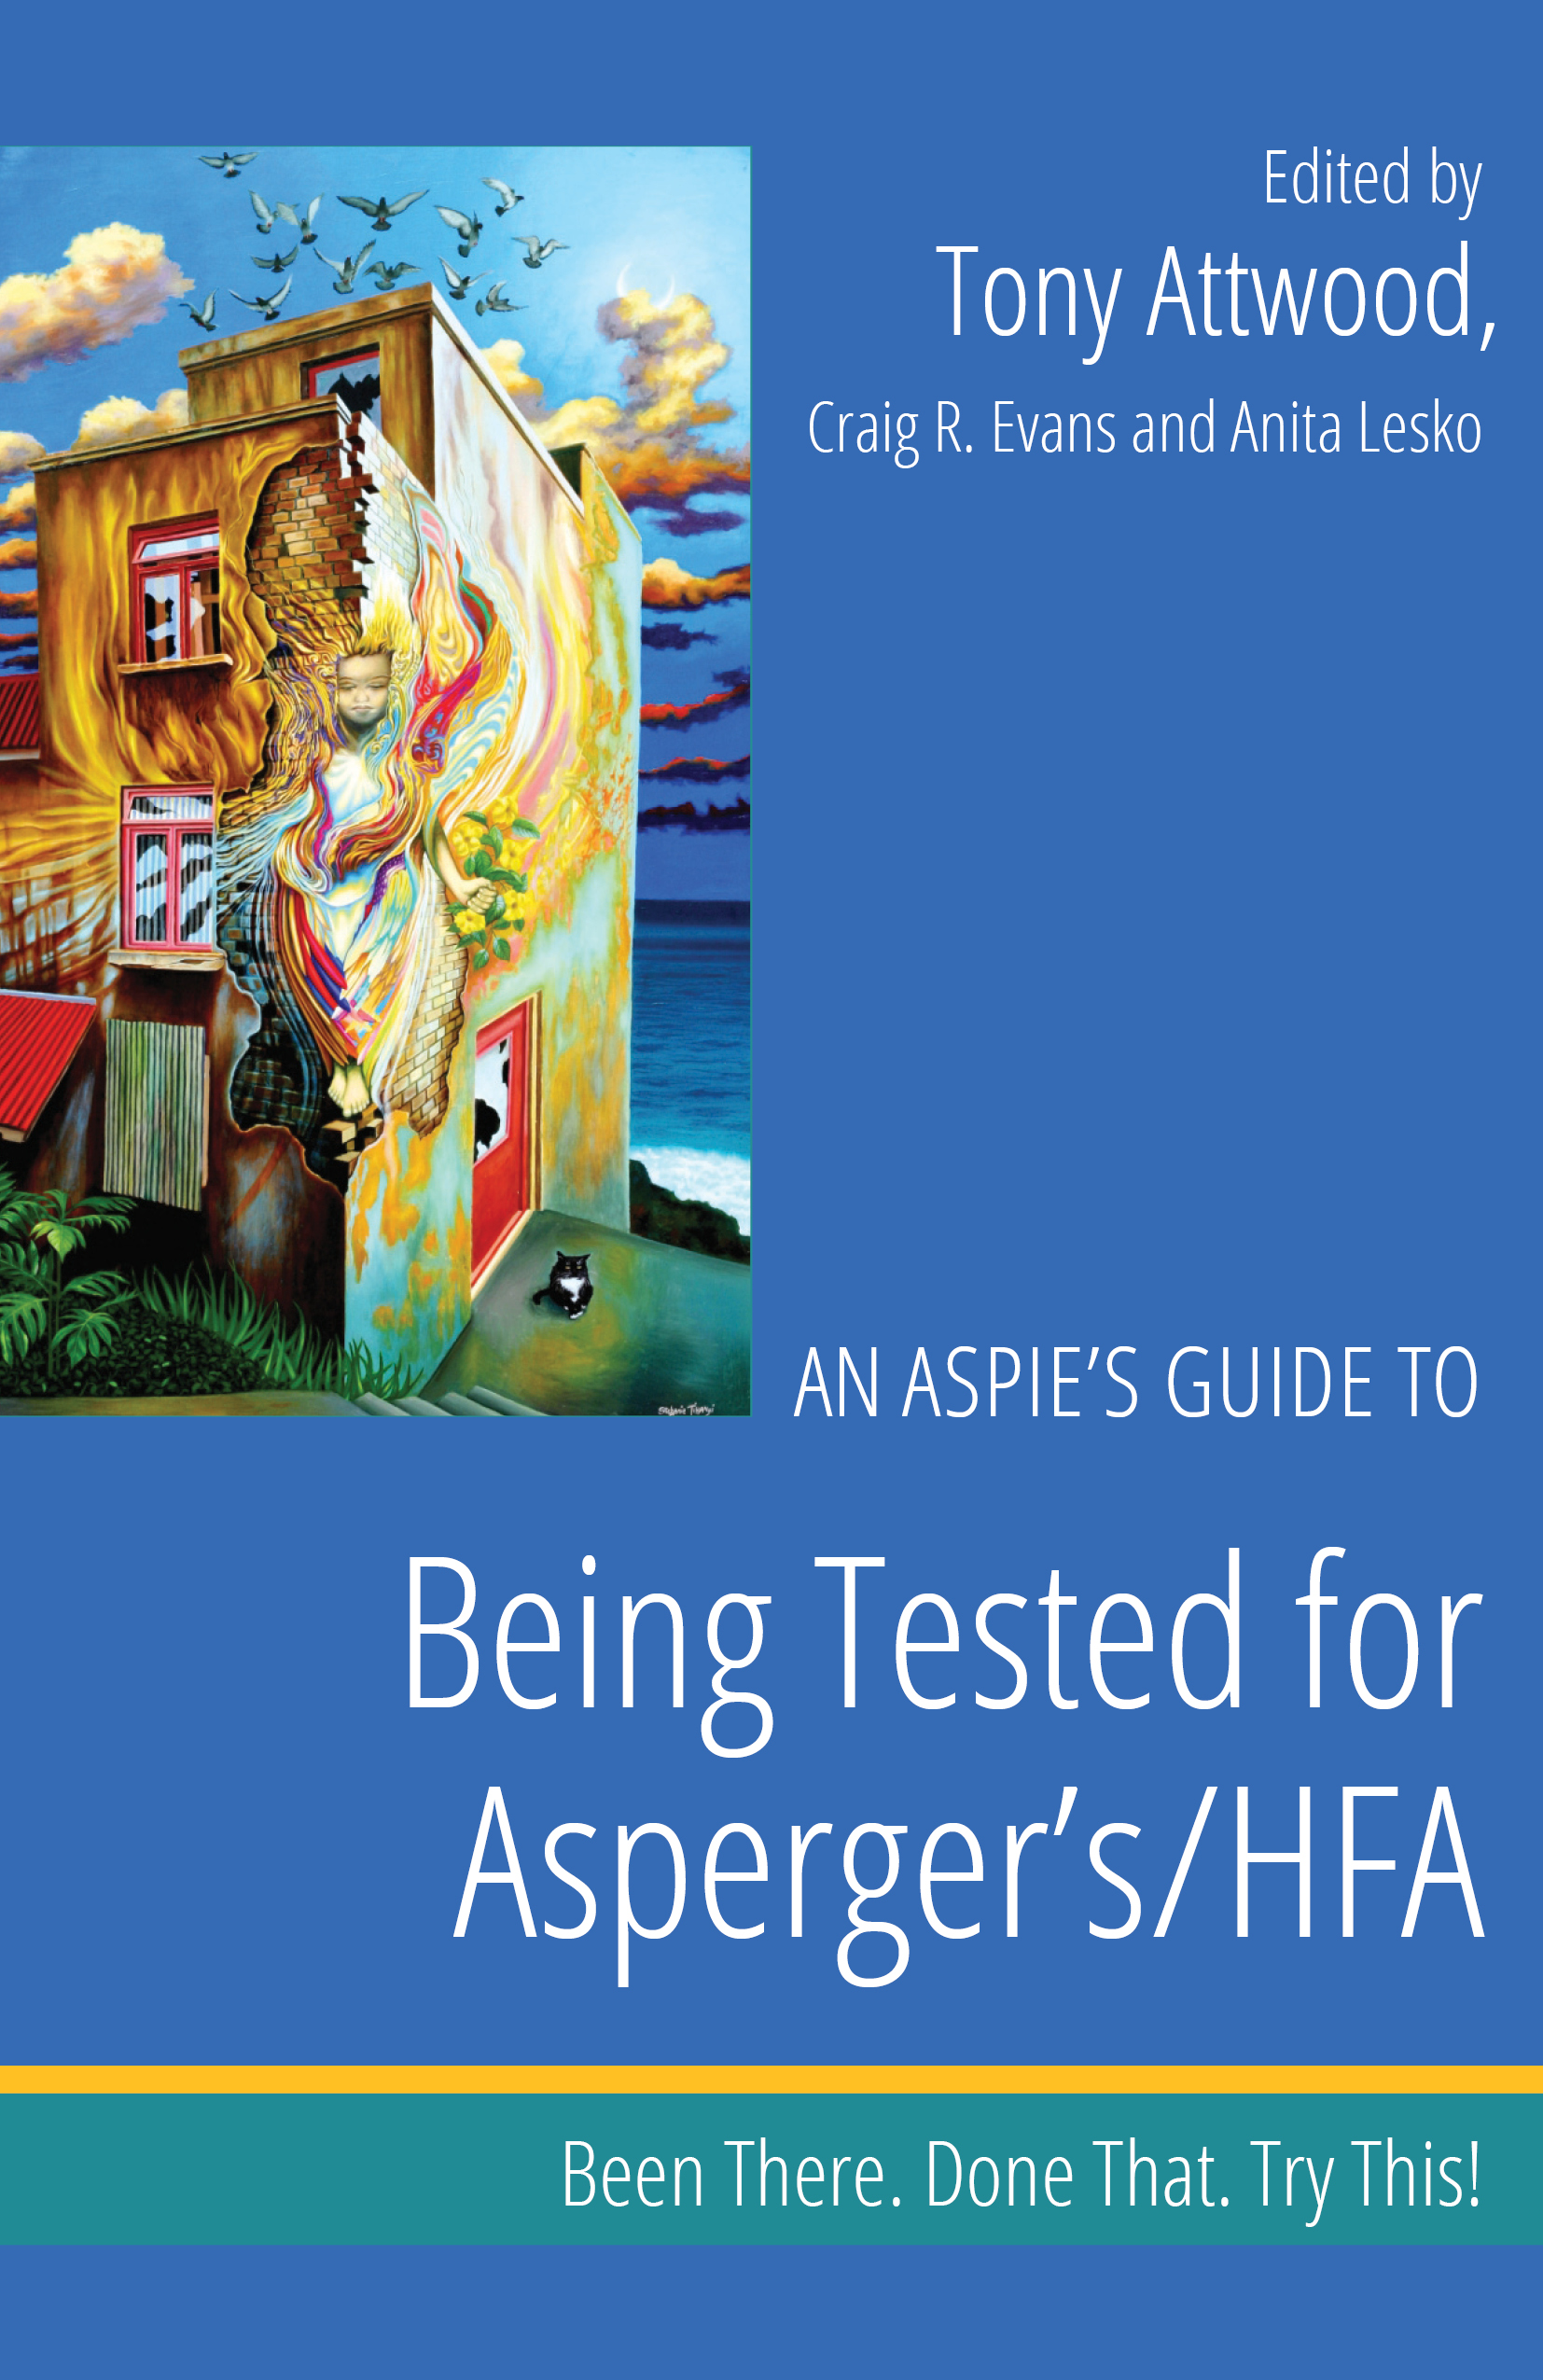 An Aspie's Guide to Being Tested for Asperger's/HFA